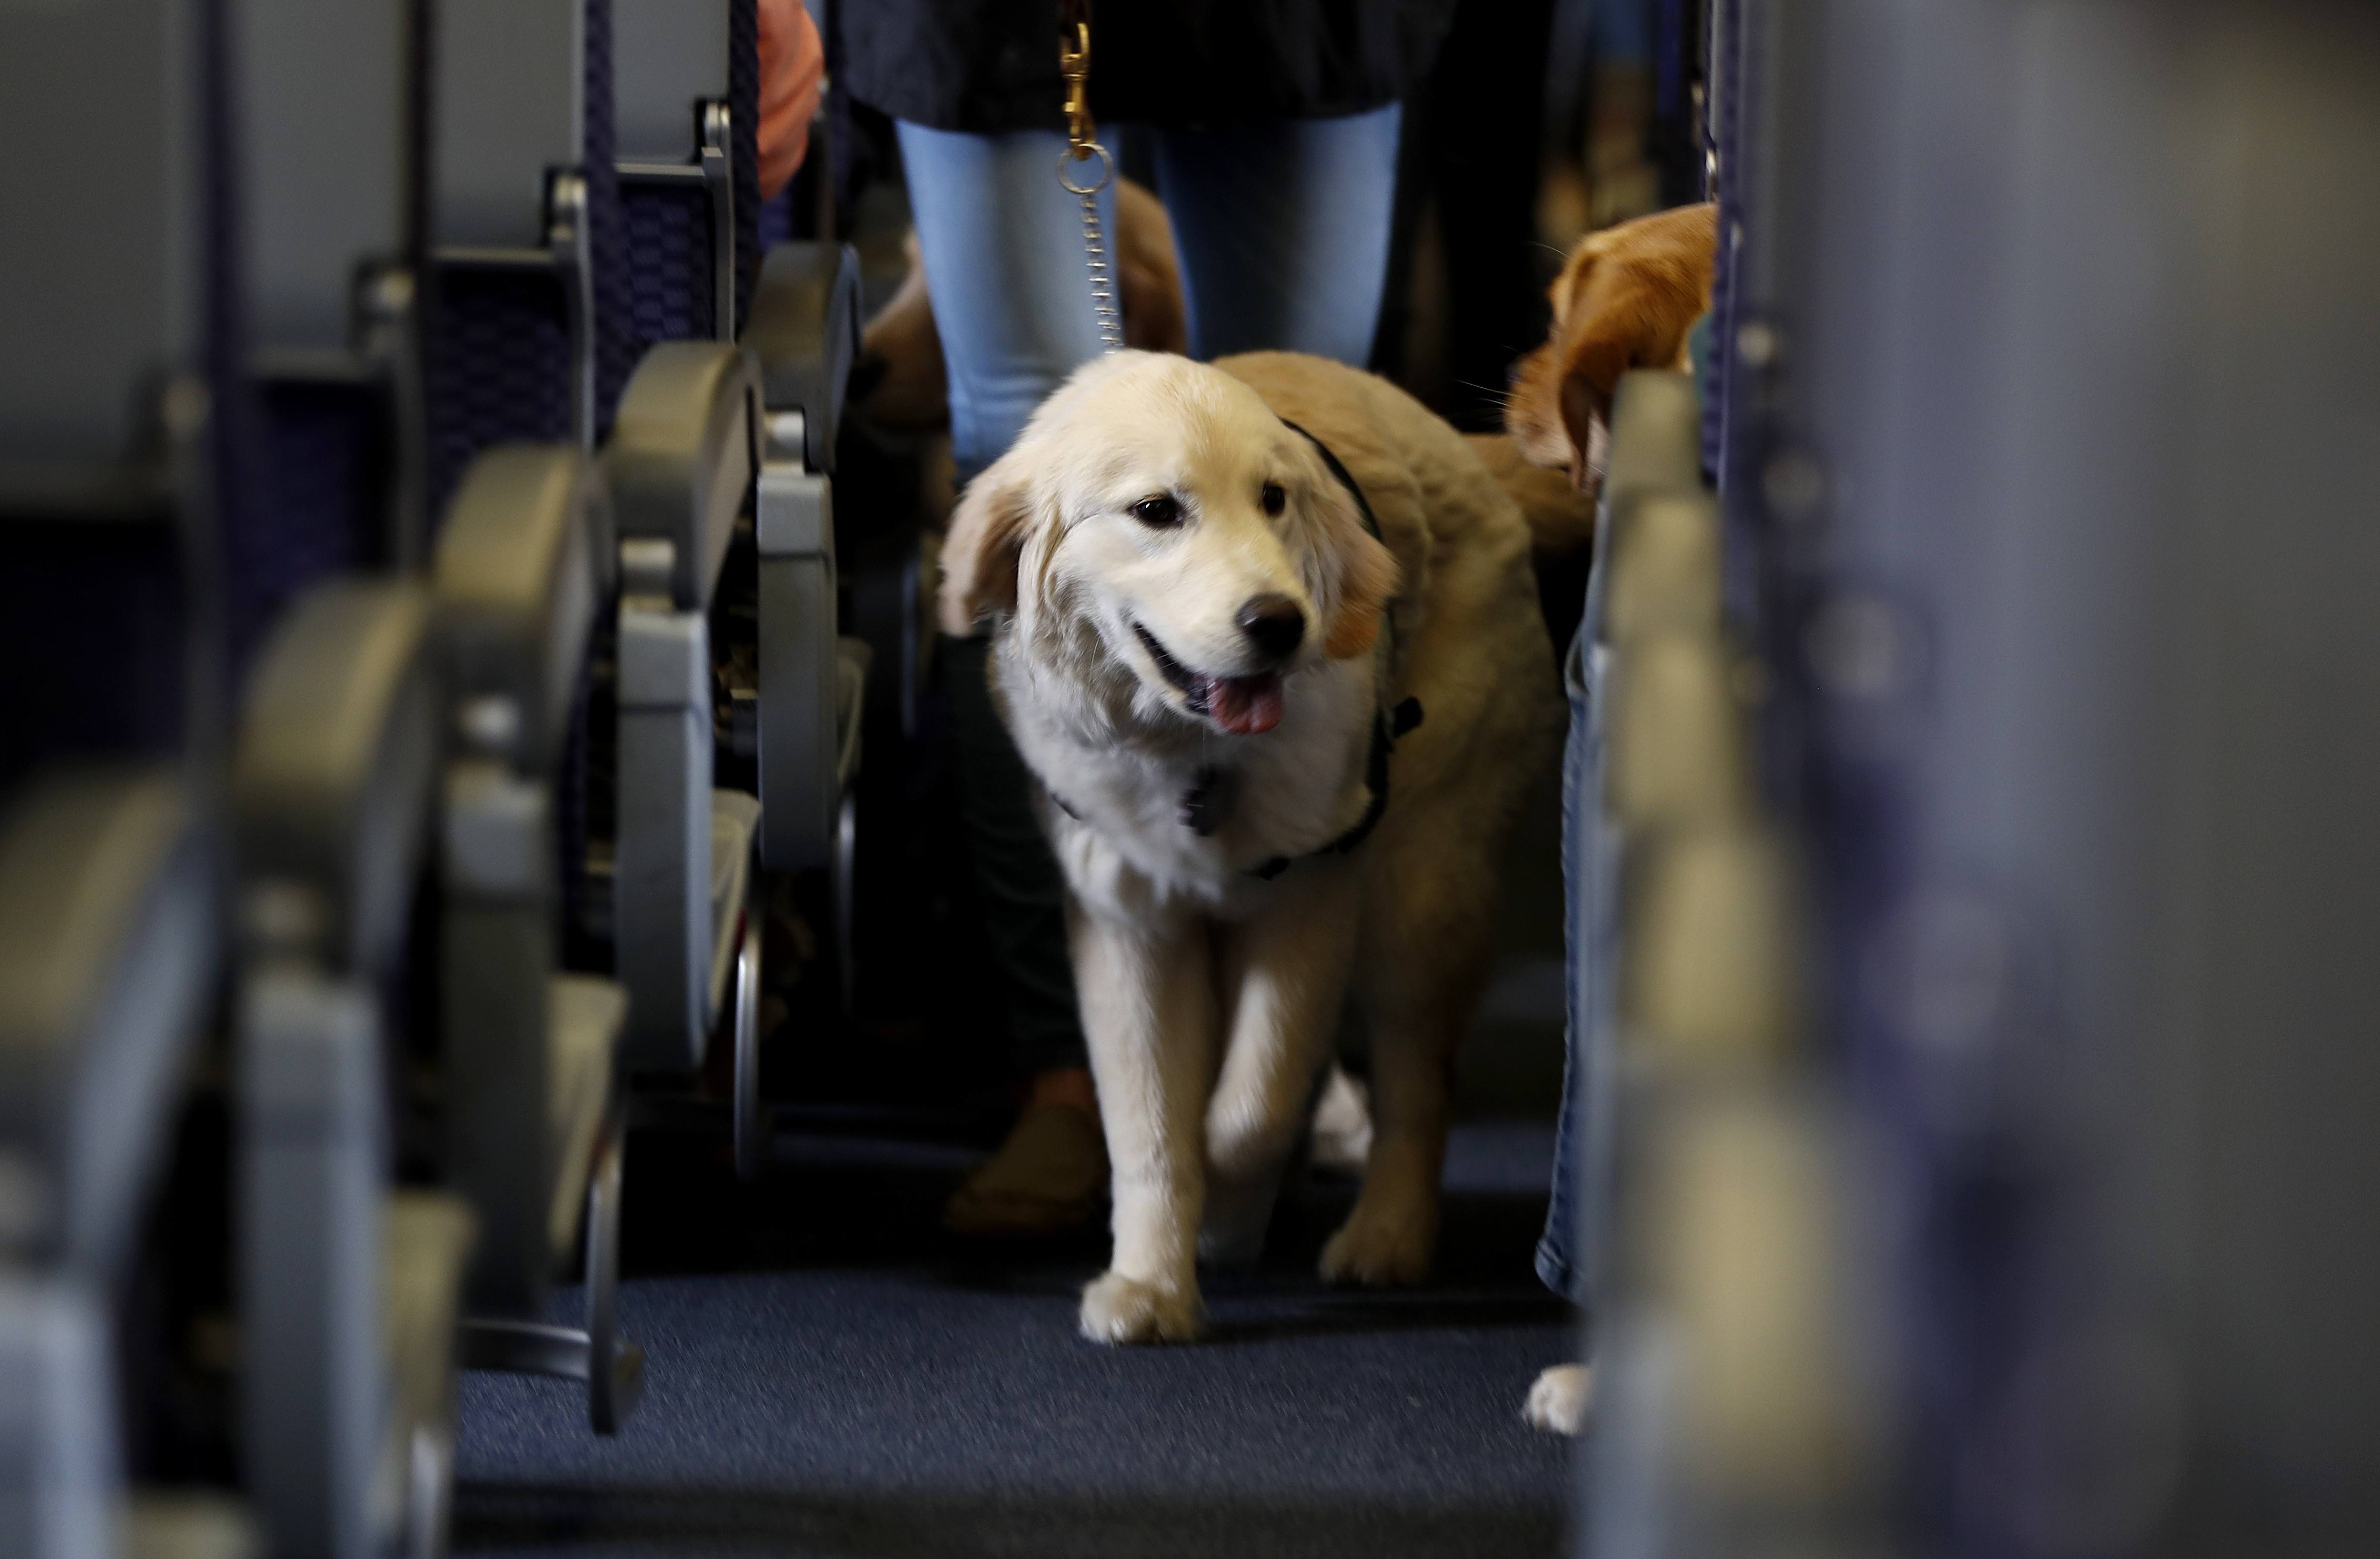 Delta is asking customers to confirm their dogs are trained, after complaints about animals biting or peeing and pooping doubled since 2016.